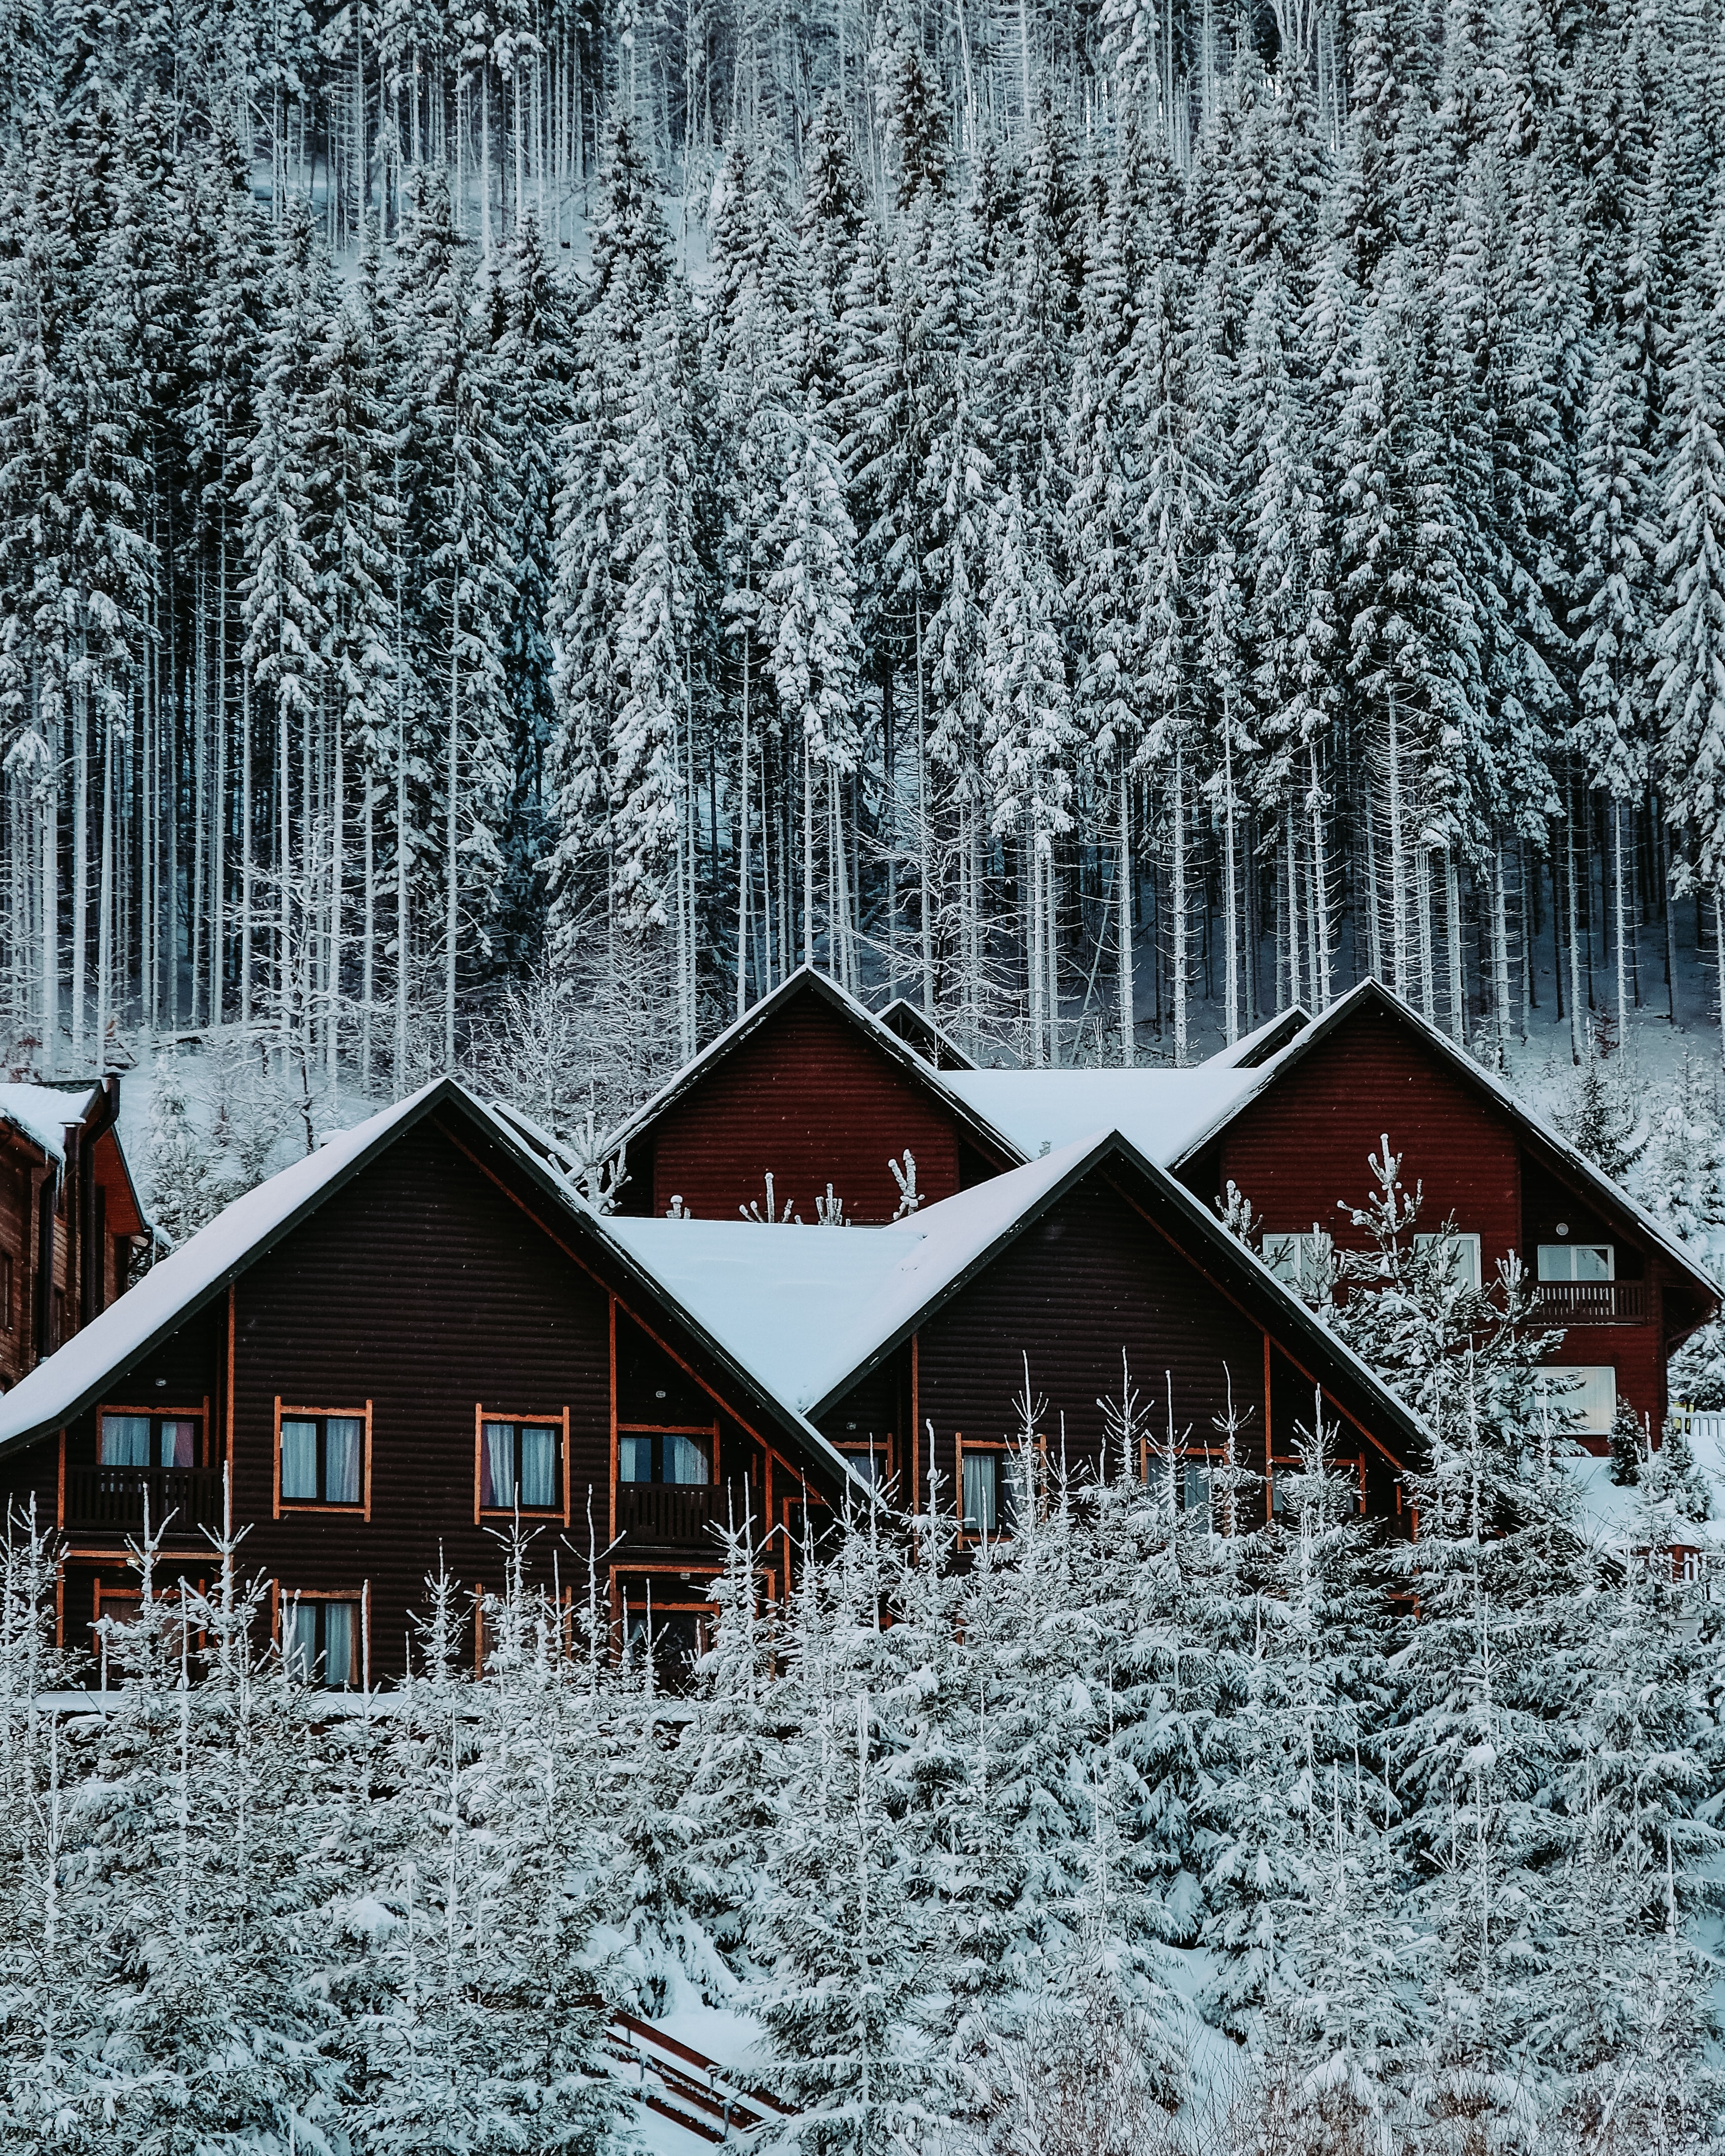 New Lock Screen Wallpapers houses, winter, nature, snow, forest